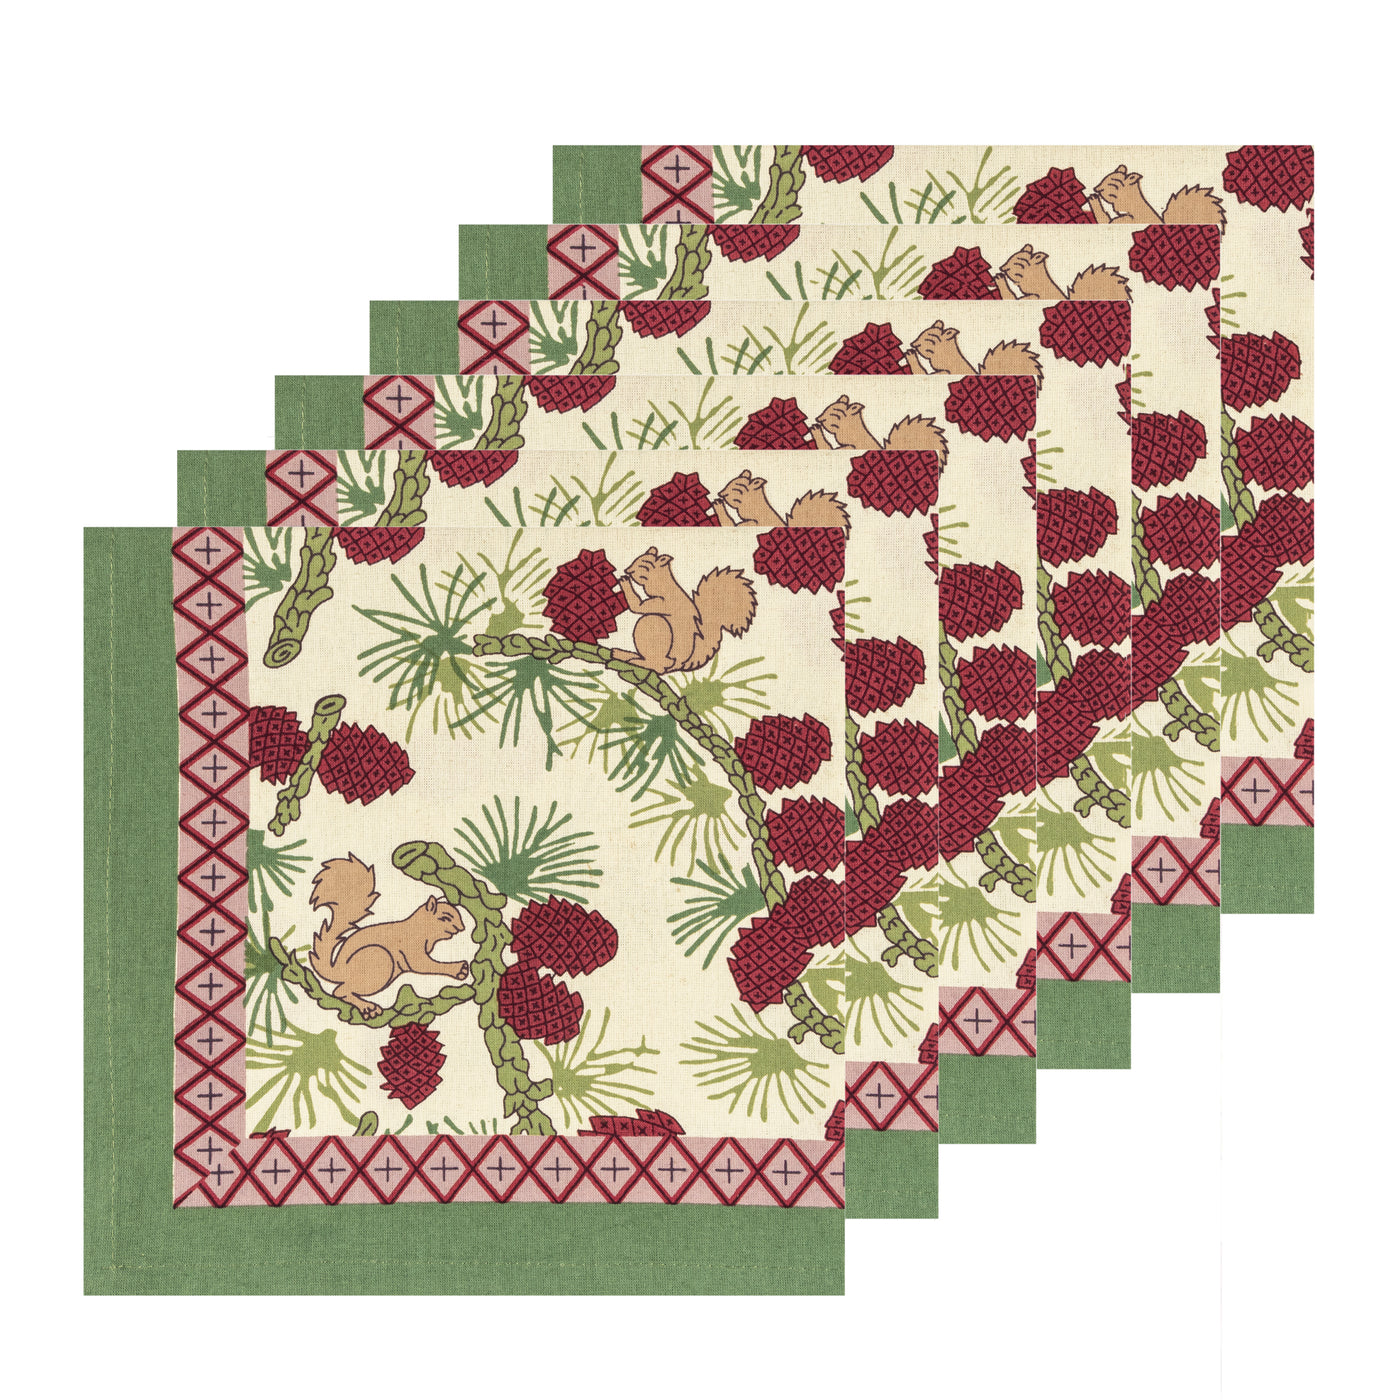 Squirrel & Pinecone Red & Brown Napkins, Set of 6